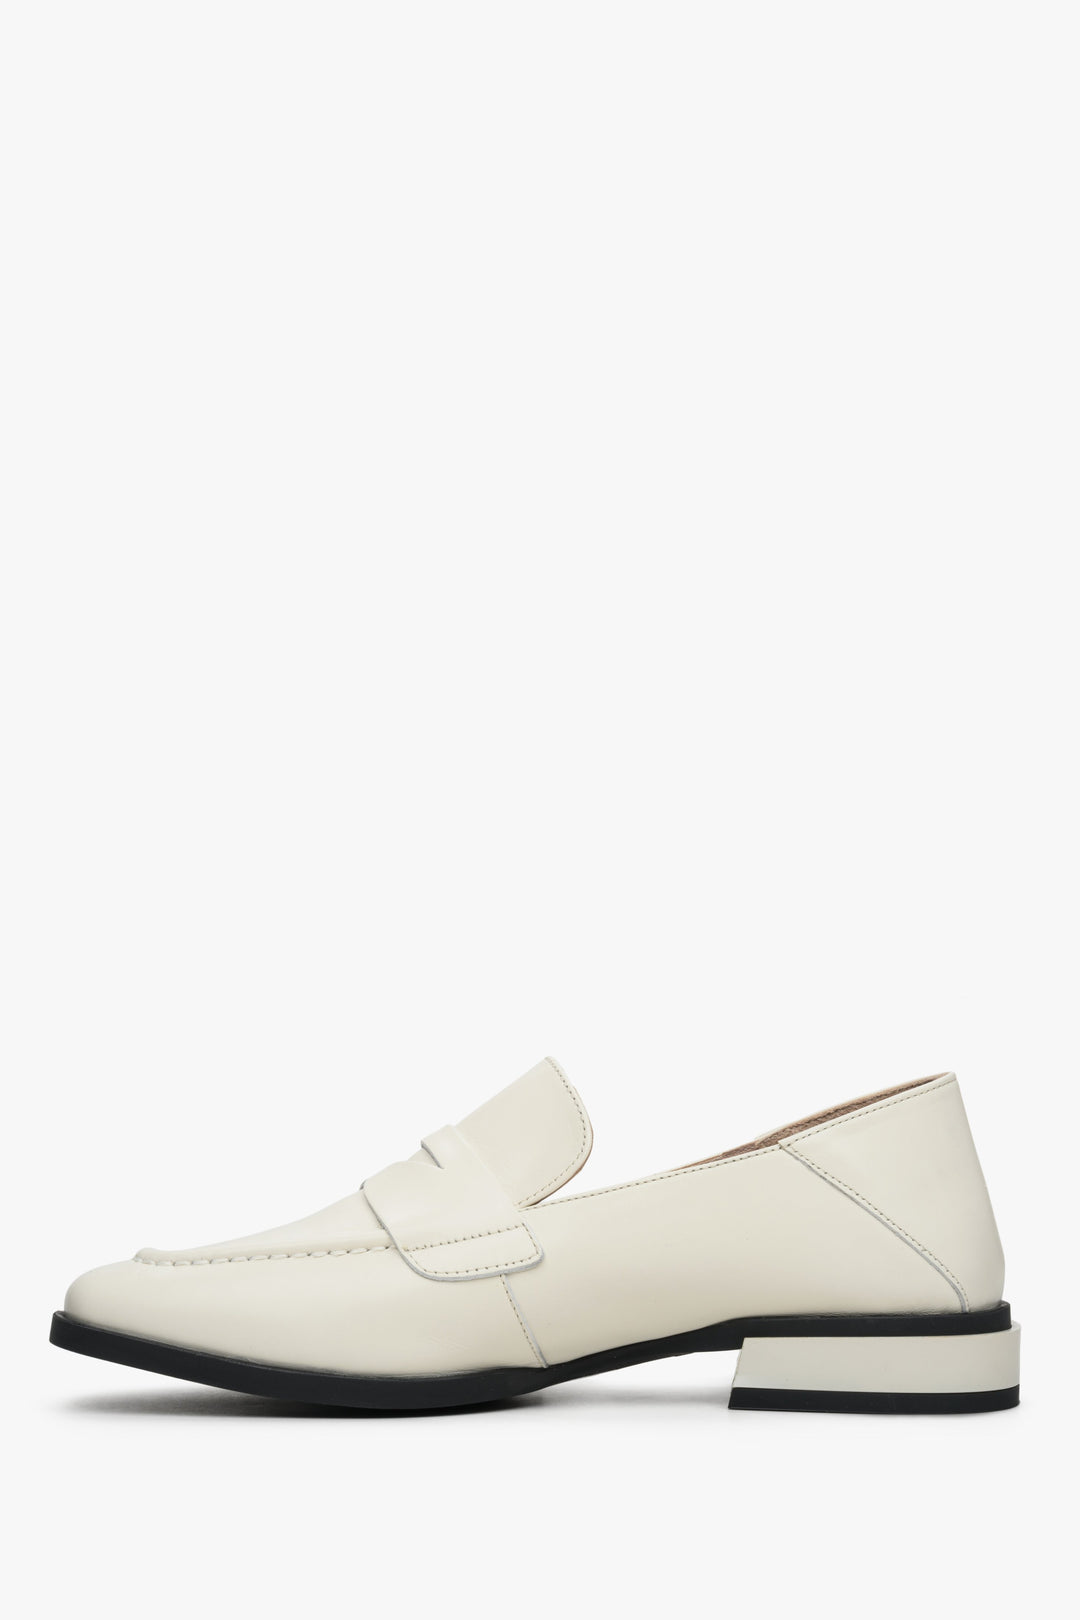 Women's white leather loafers with a low heel by Estro - shoe profile presentation.